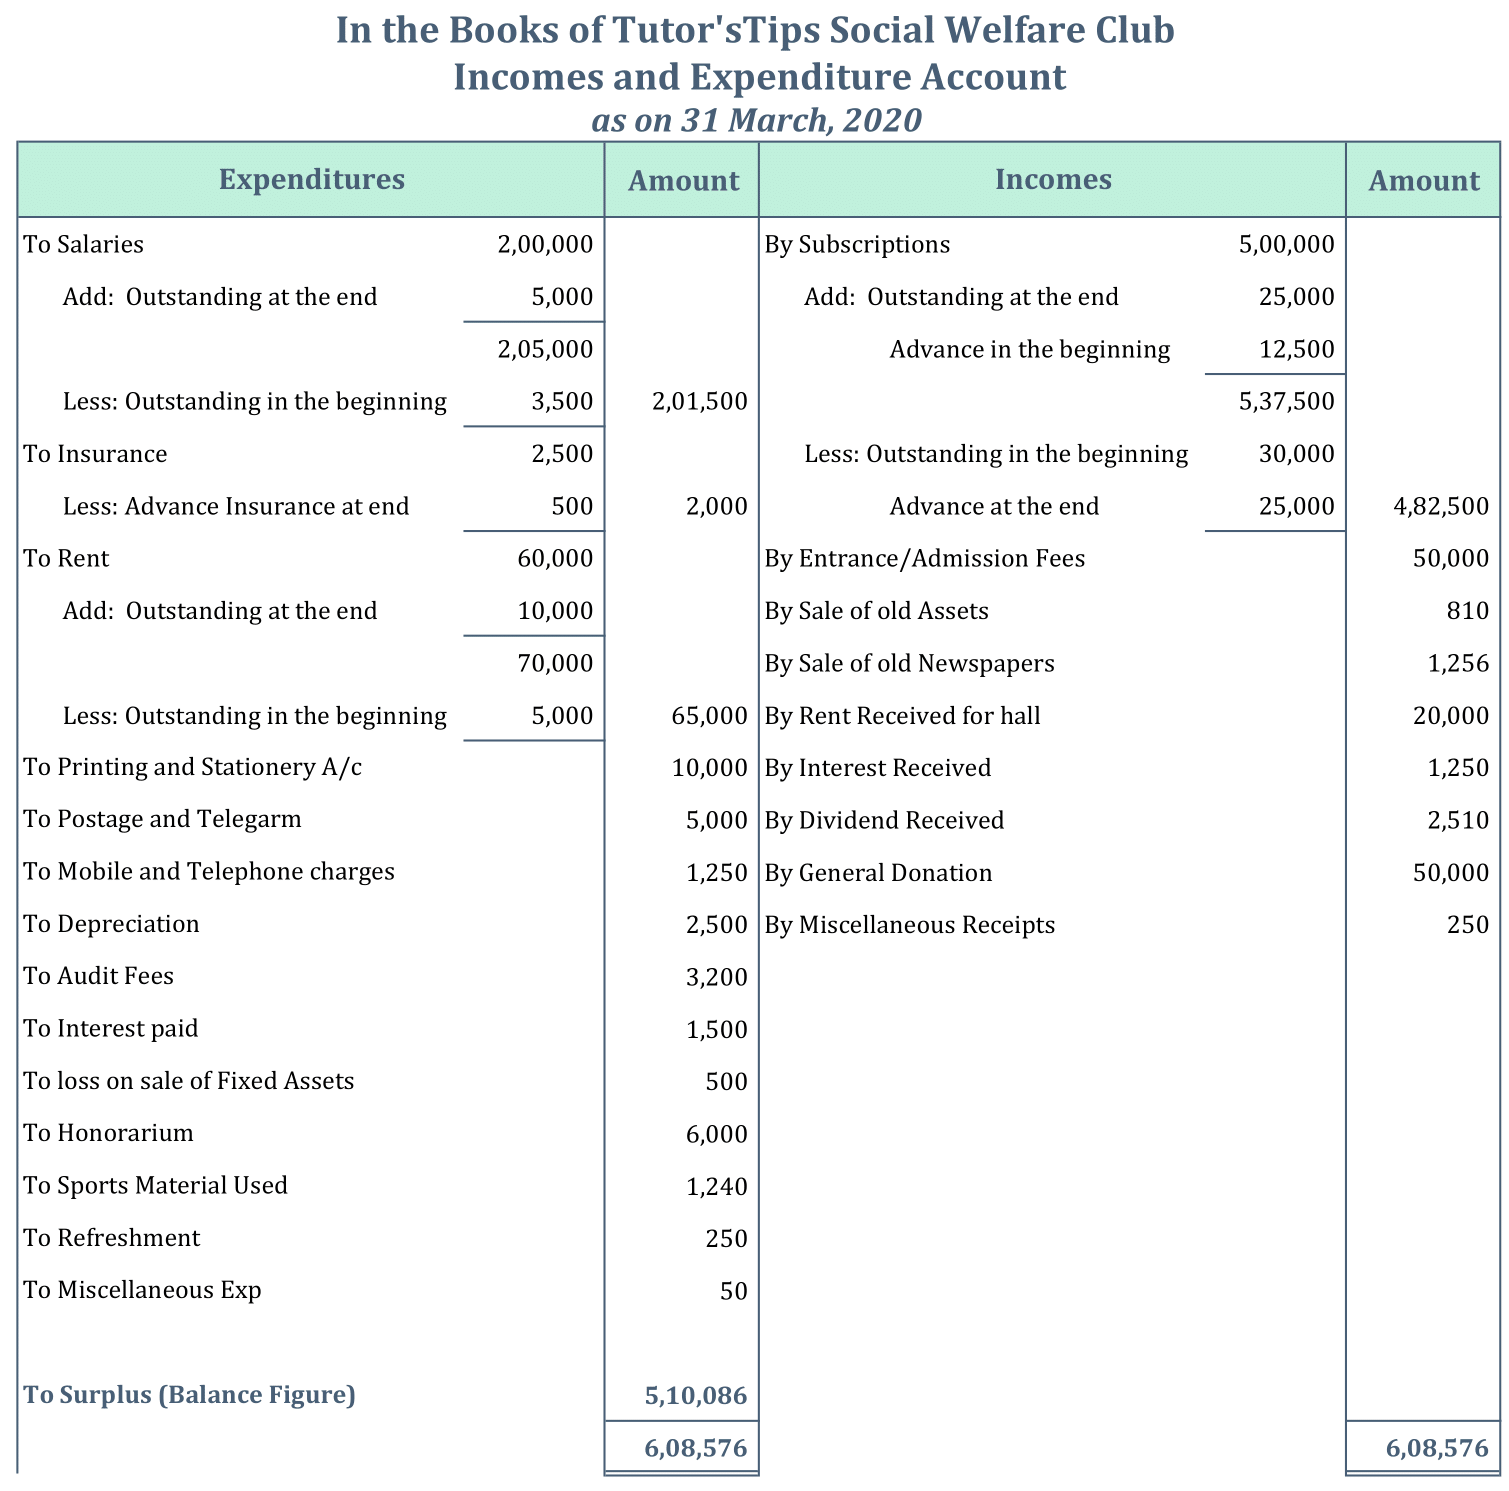 Incomes and Expenditures Account Example - Surplus Balance